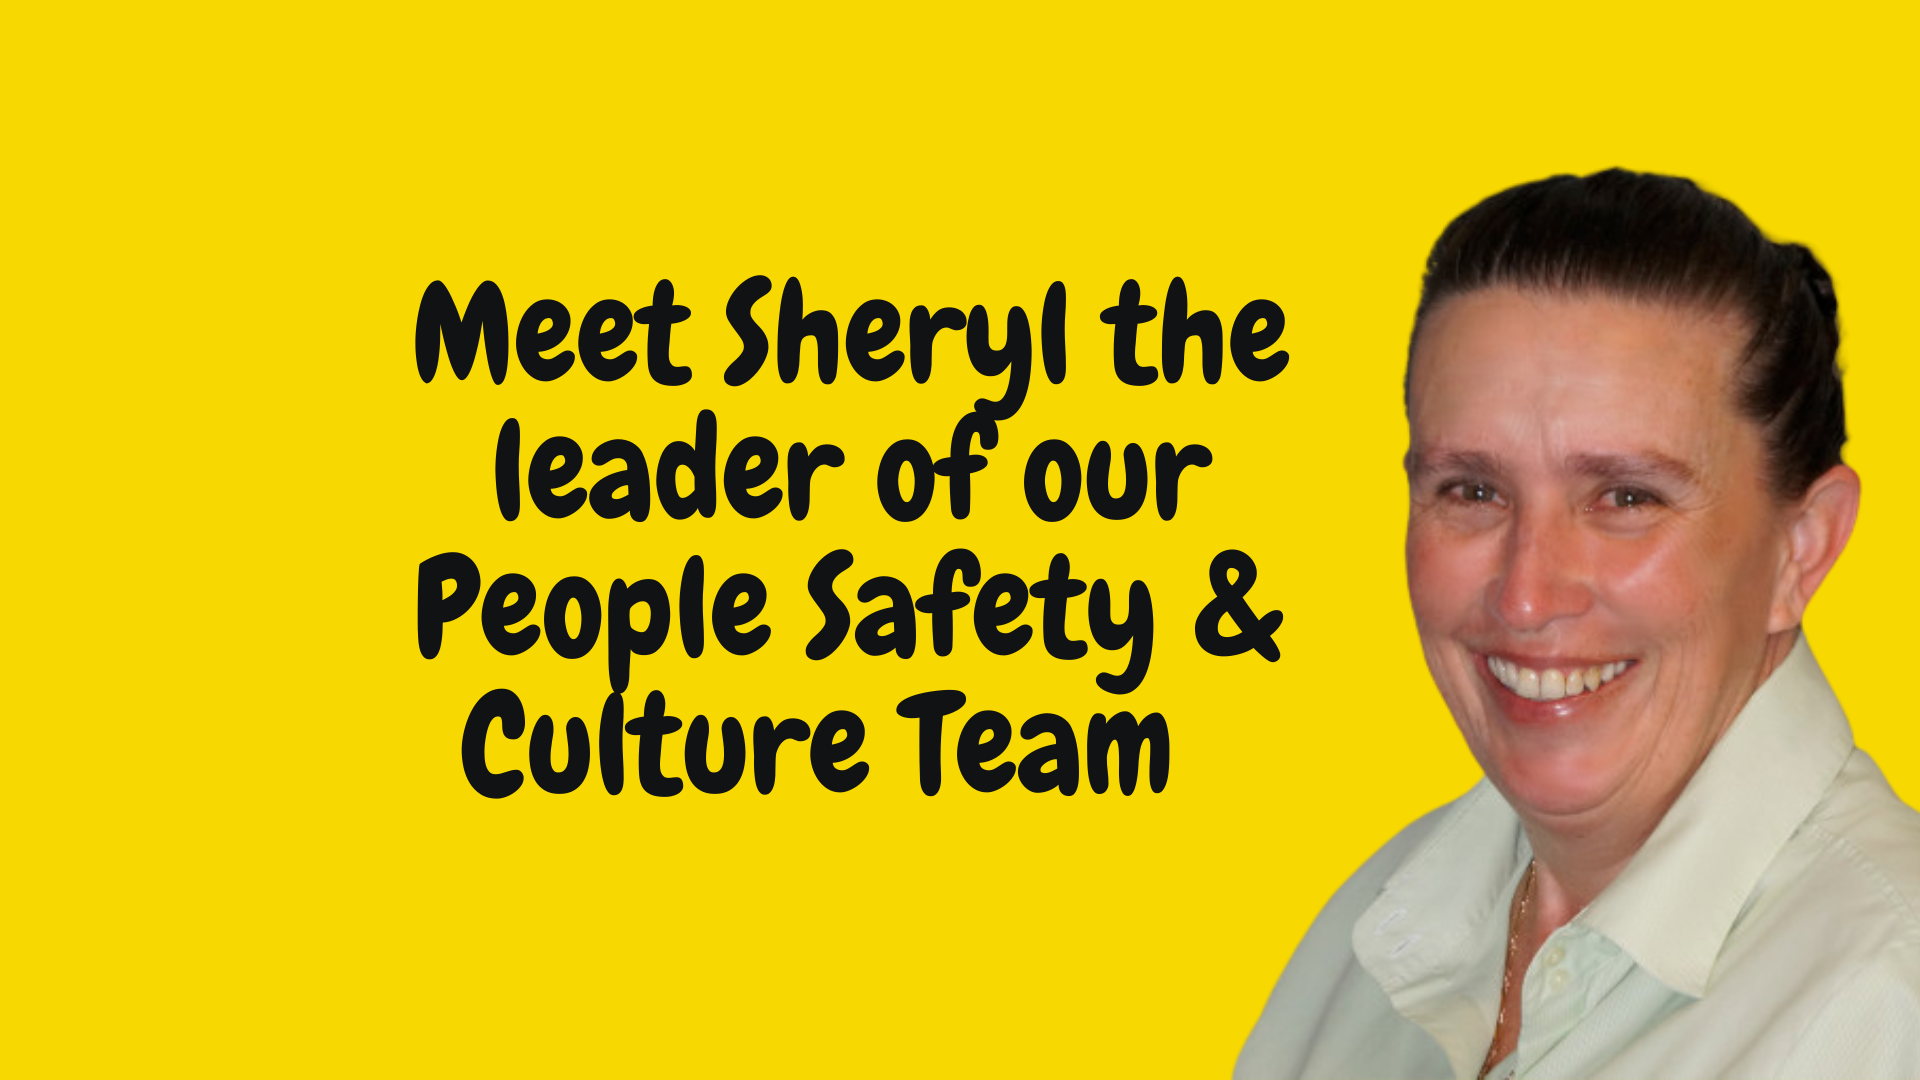 People Safety & Culture Team Leader